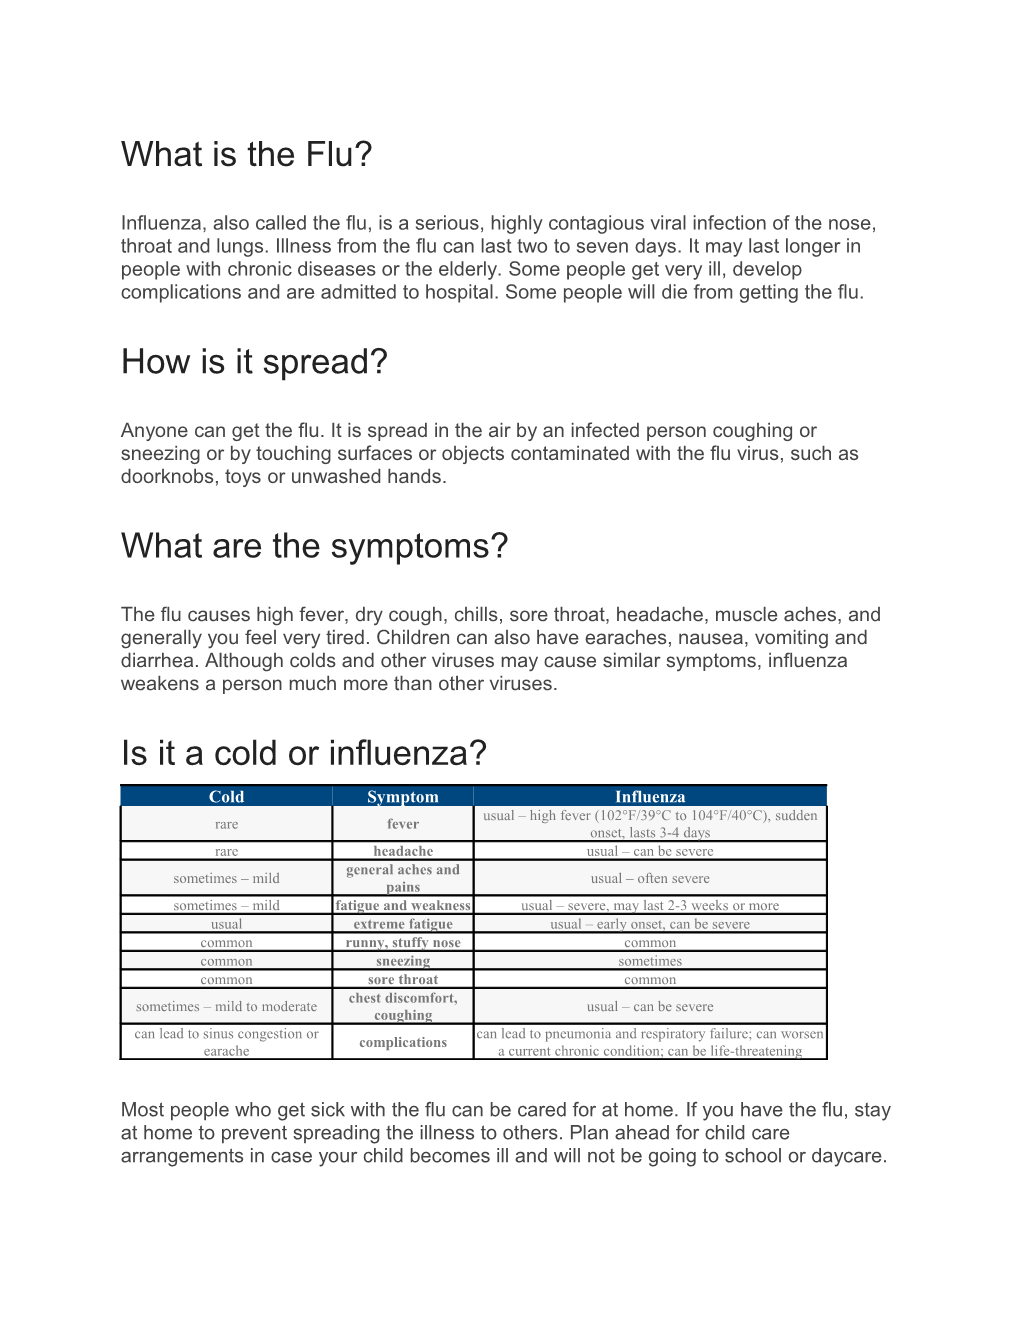 What Is the Flu?